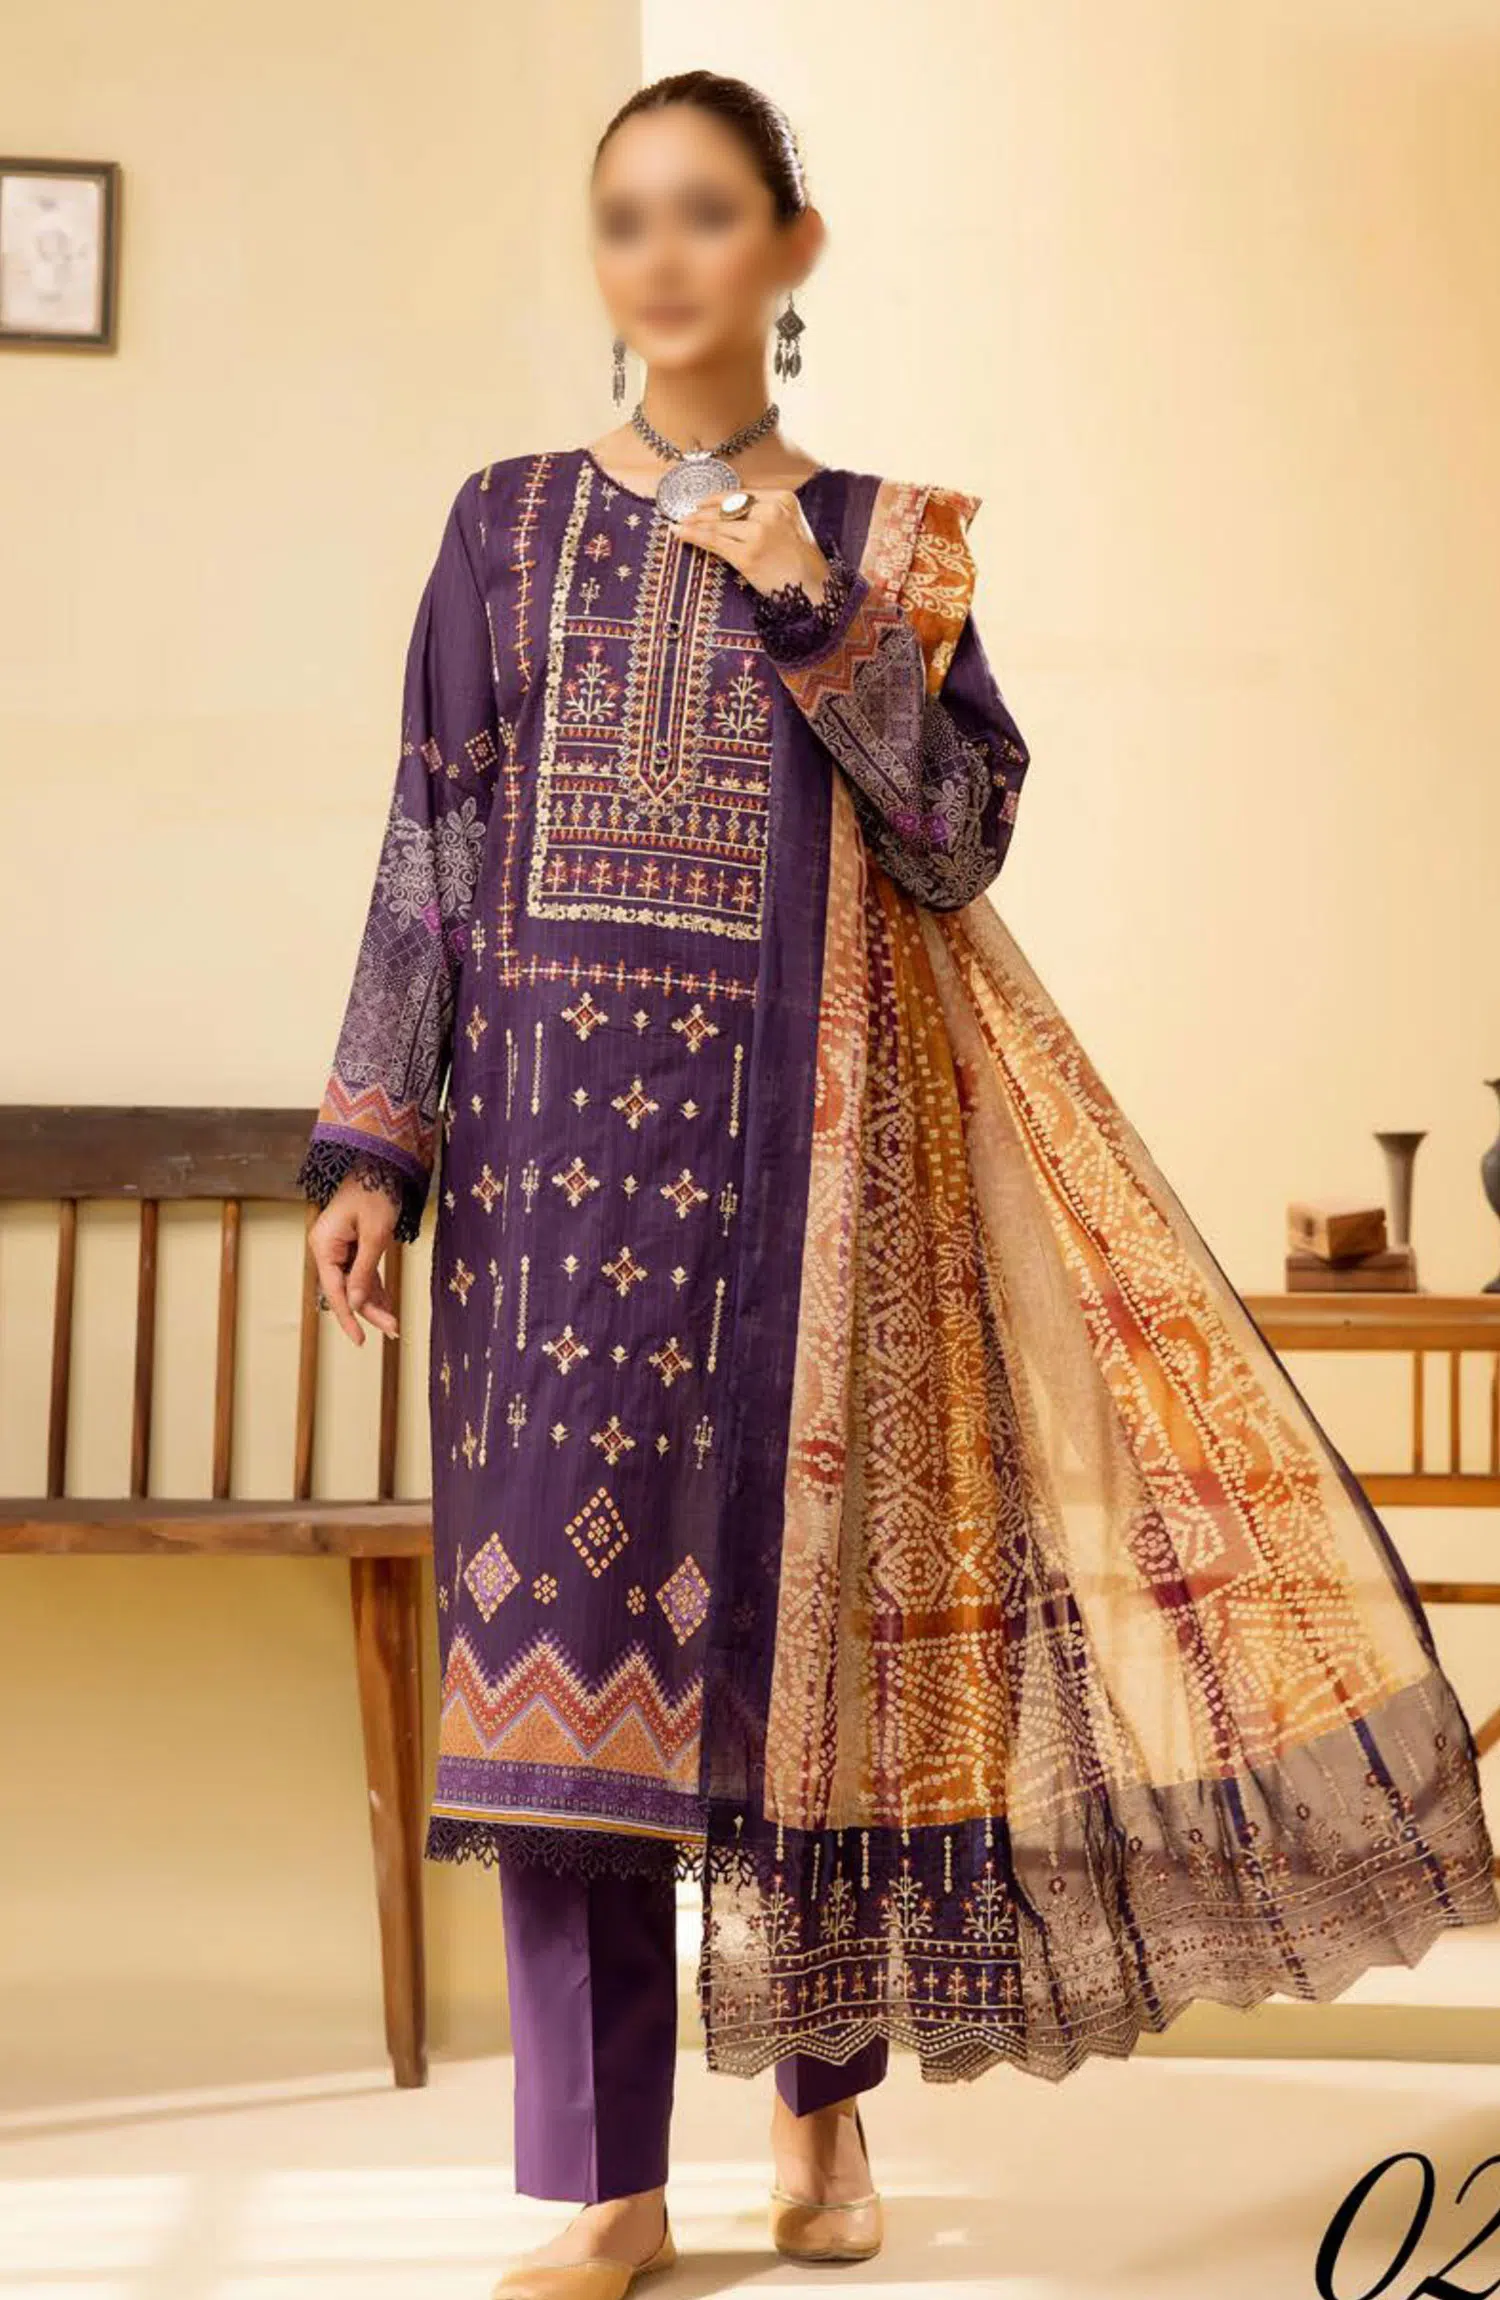 Mahees Ghazal Embroidered Lawn with Emb Voile Dupatta Collection - Design 02